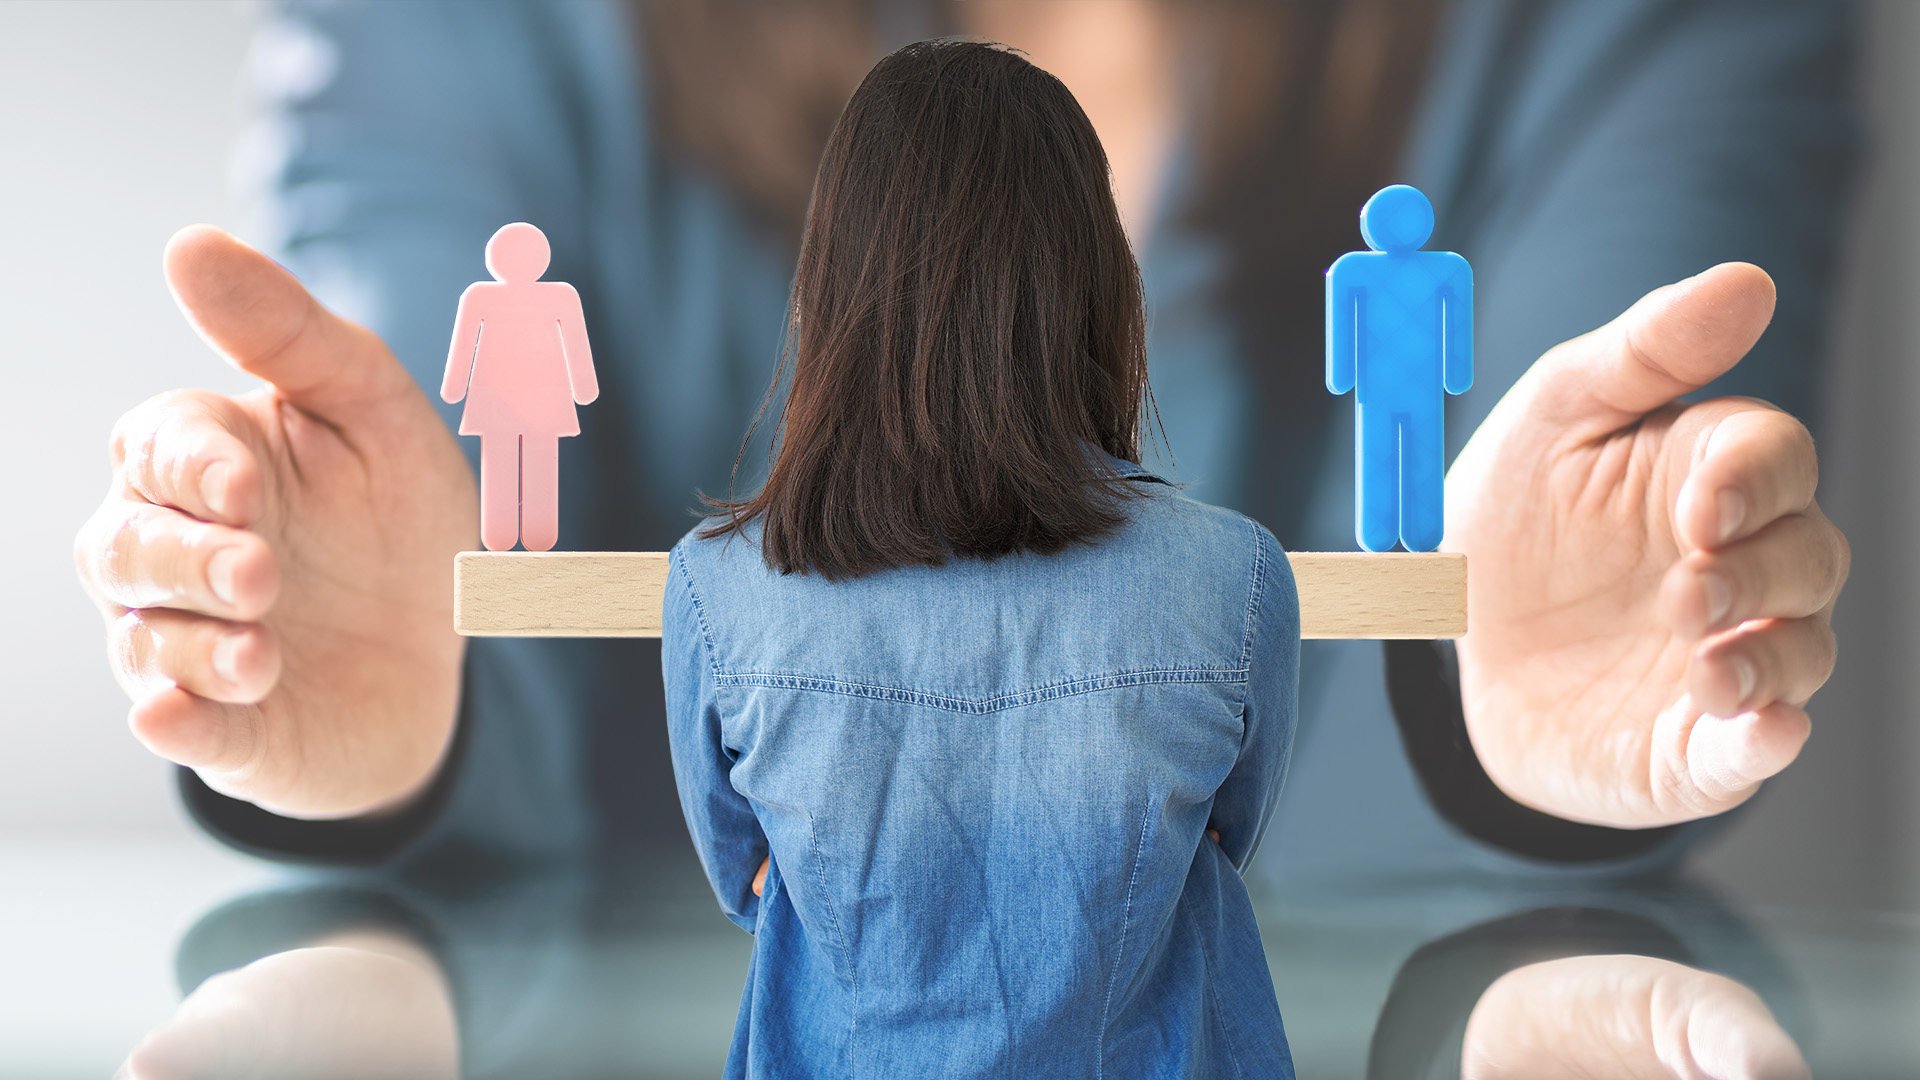 The workplace rights of transgender people in China have been boosted after a Beijing court ruled in favour of a trans staffer who was sacked for taking time off to recover from gender reassignment surgery. Photo: SCMP composite/Shutterstock